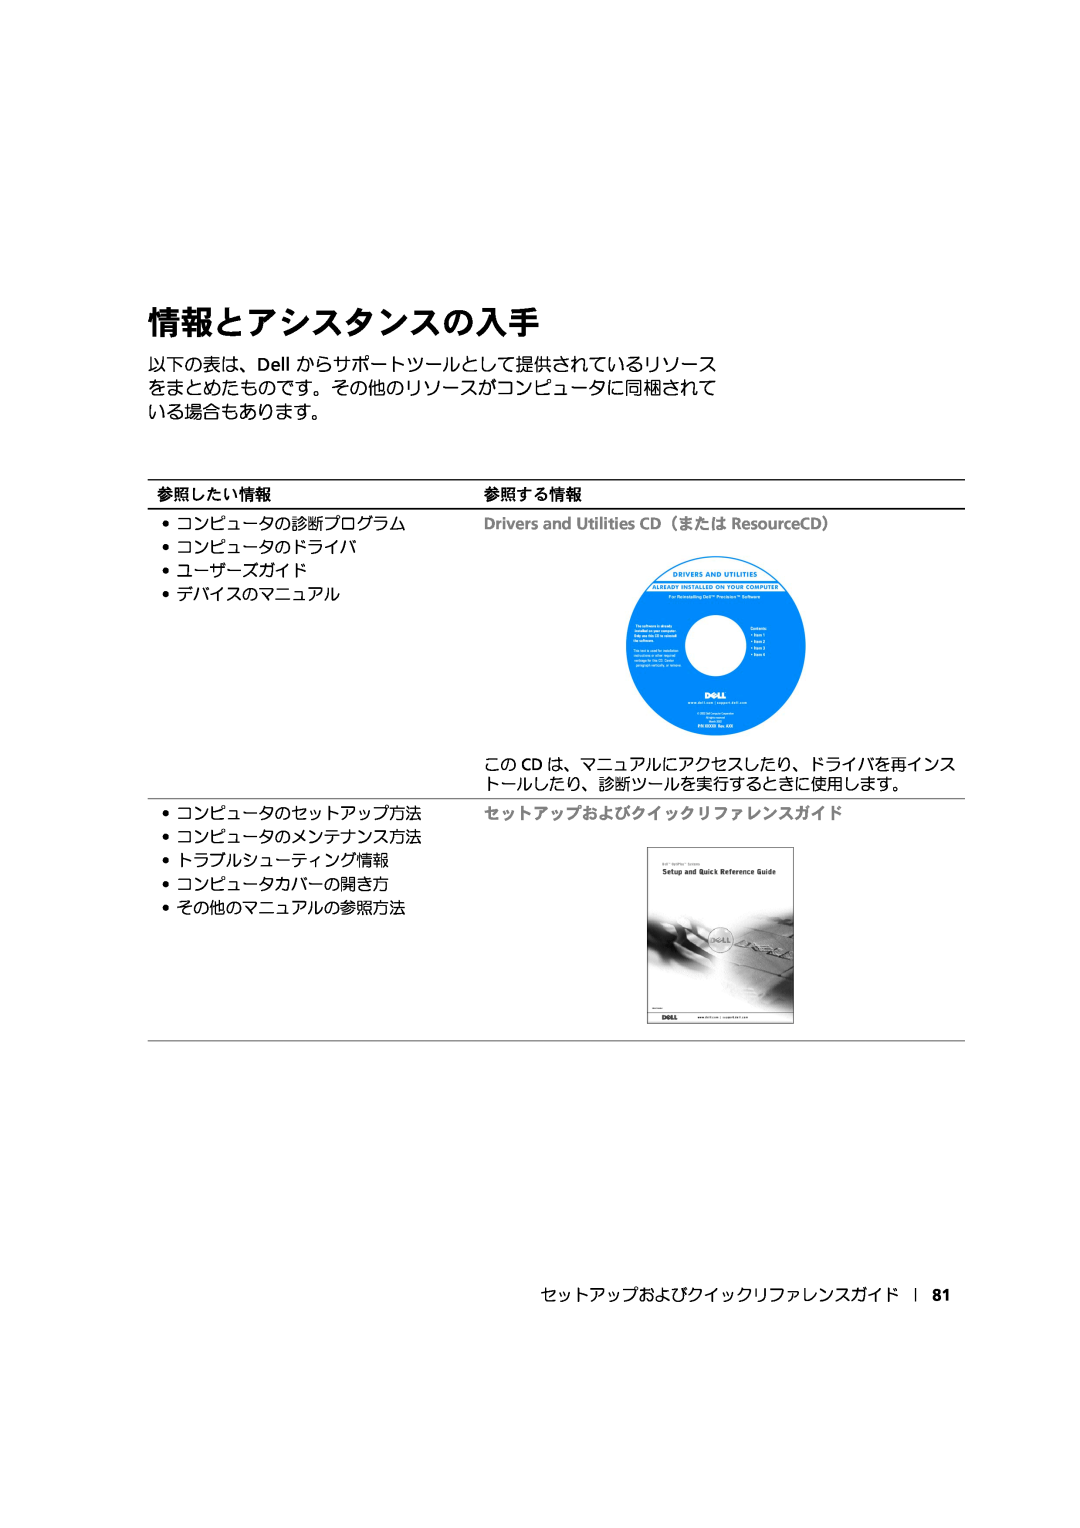 Dell 533CX manual 情報とアシスタンスの入手, Drivers and Utilities CD（または ResourceCD）, コンピュータのセットアップ方法 セットアップおよびクイックリファレンスガイド 